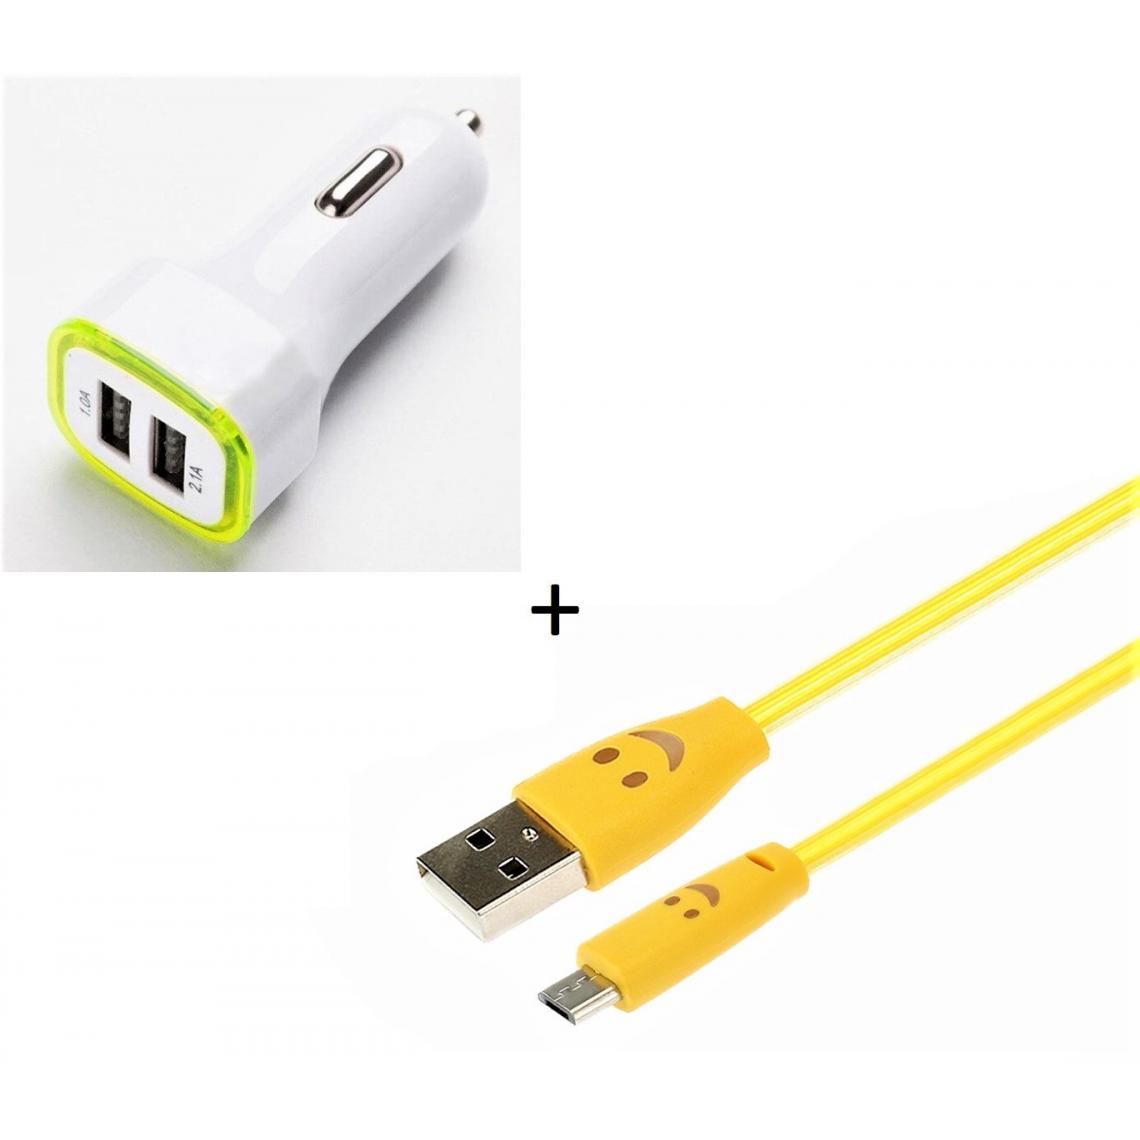 Shot - Pack Chargeur Voiture pour XIAOMI Redmi S2 Smartphone Micro USB (Cable Smiley + Double Adaptateur LED Allume Cigare) (JAUNE) - Chargeur Voiture 12V